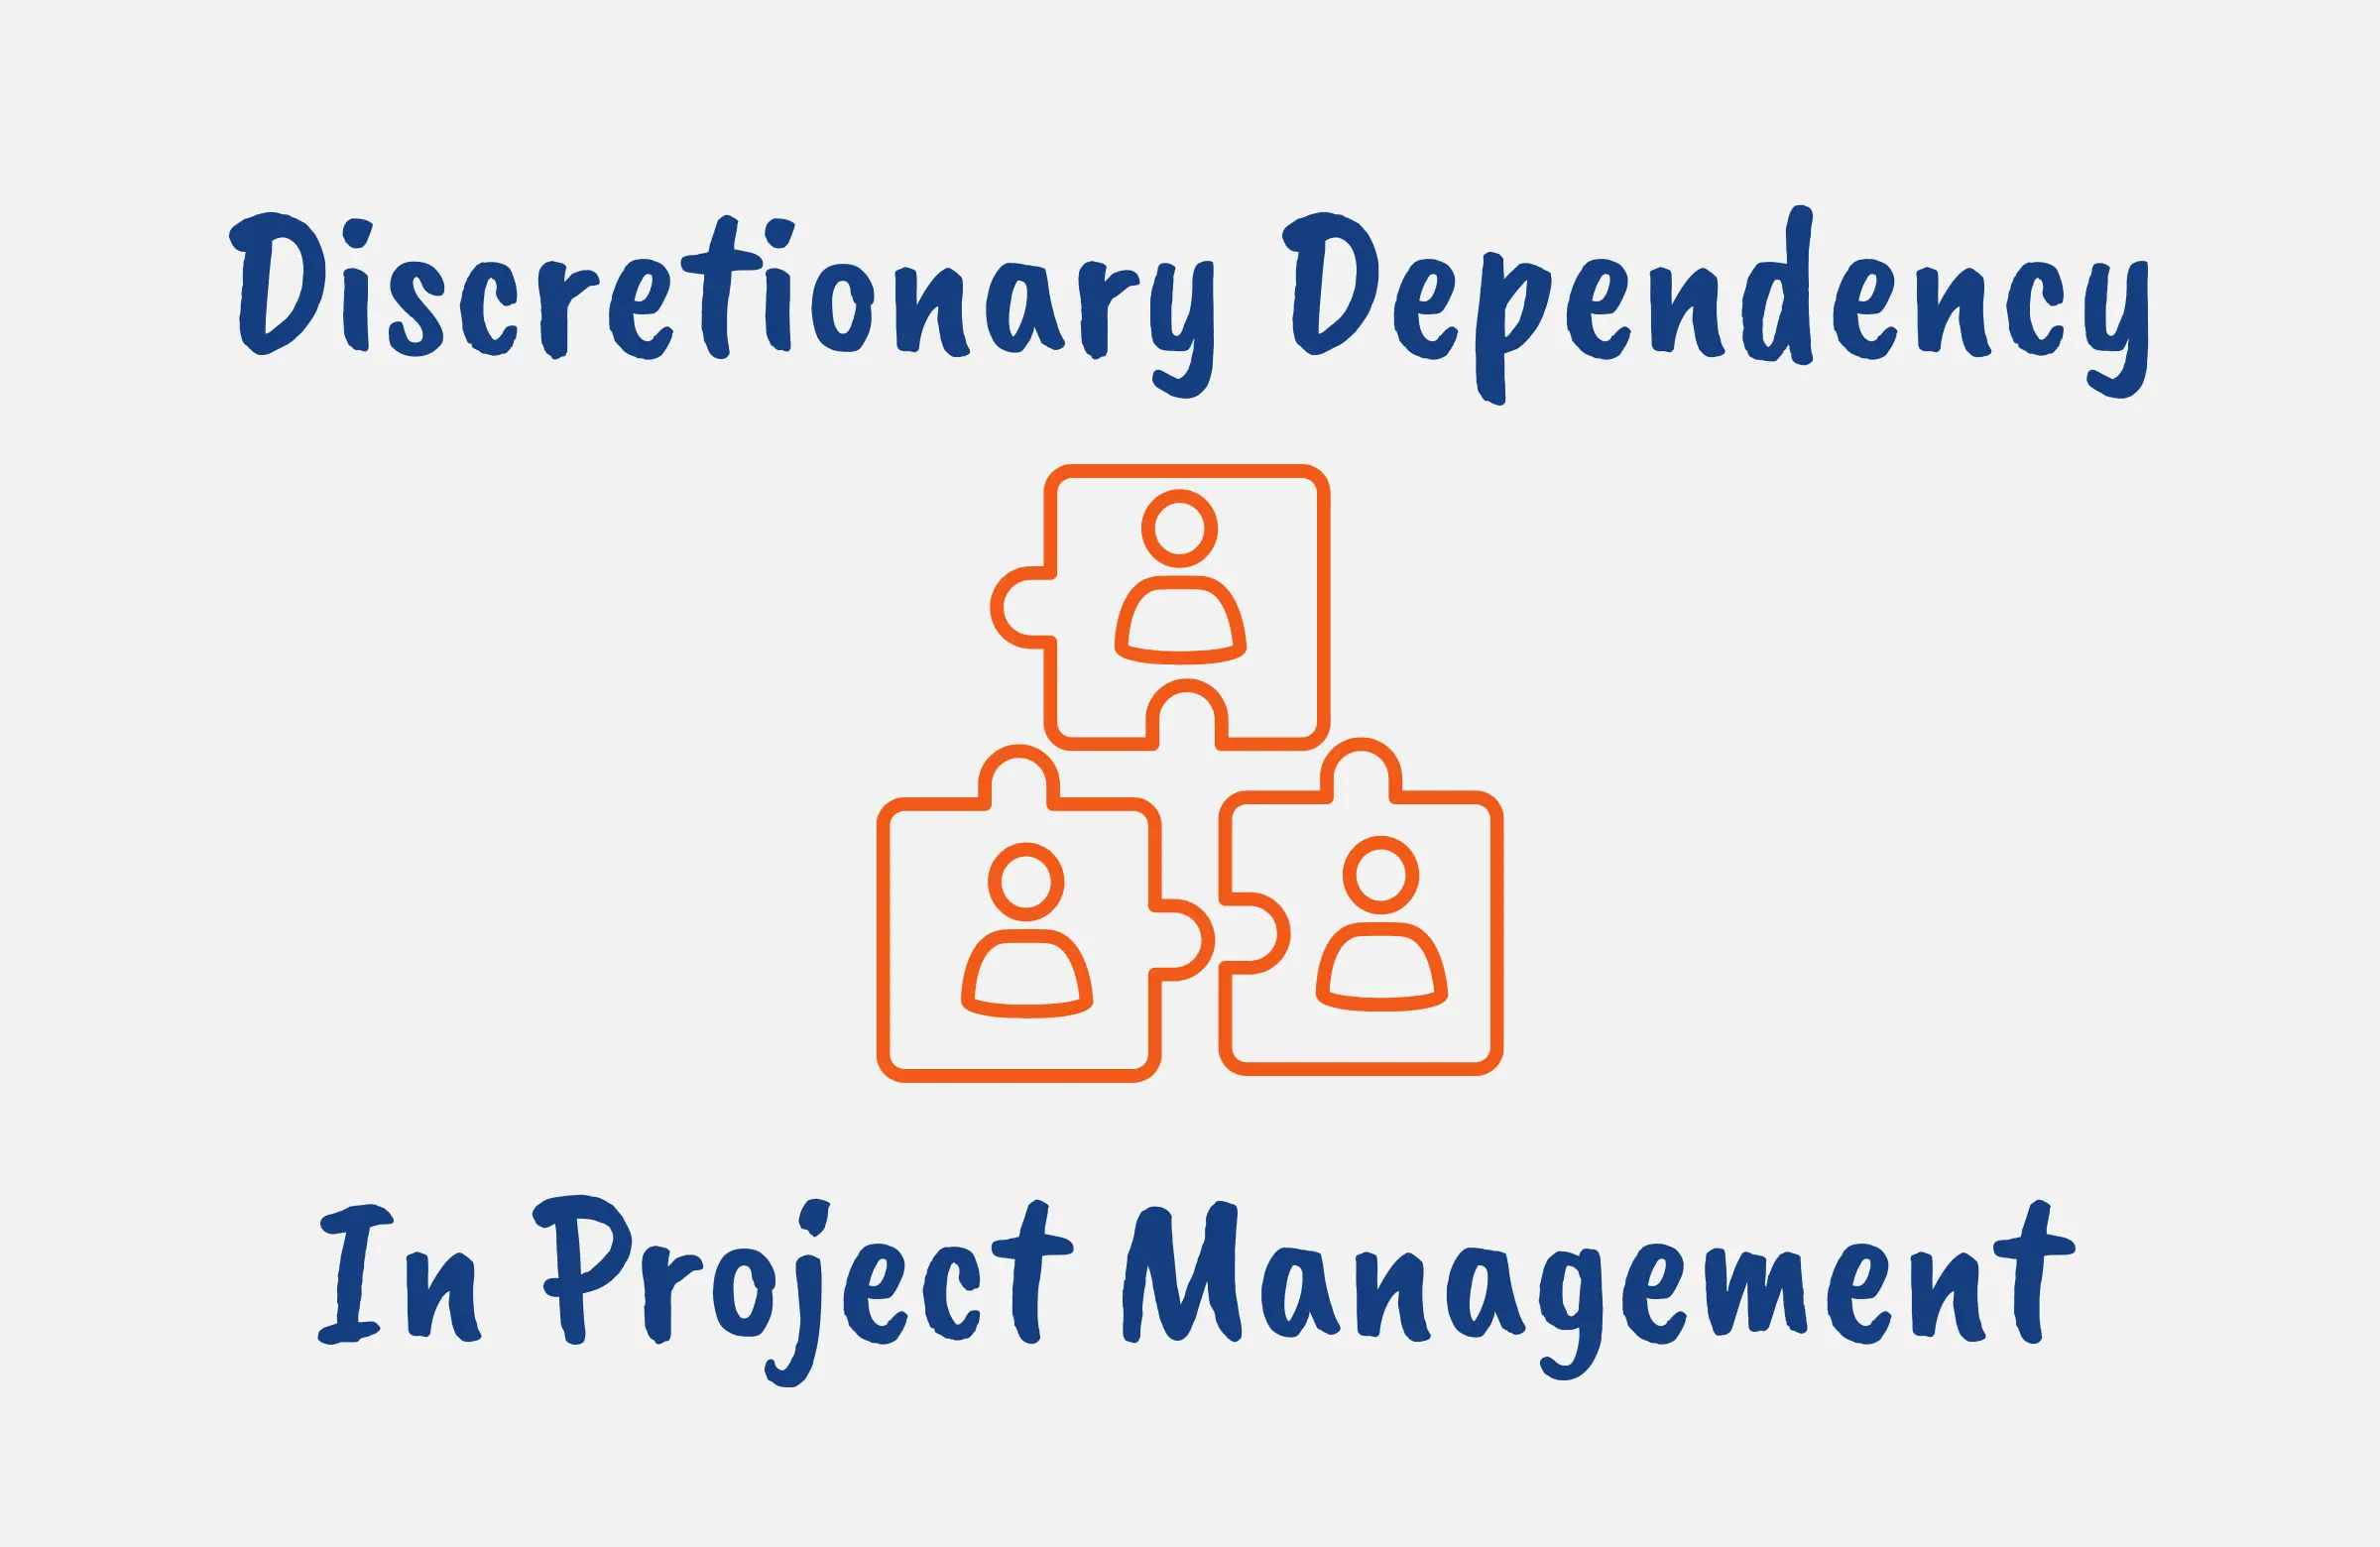 Types of Dependencies in Project Management